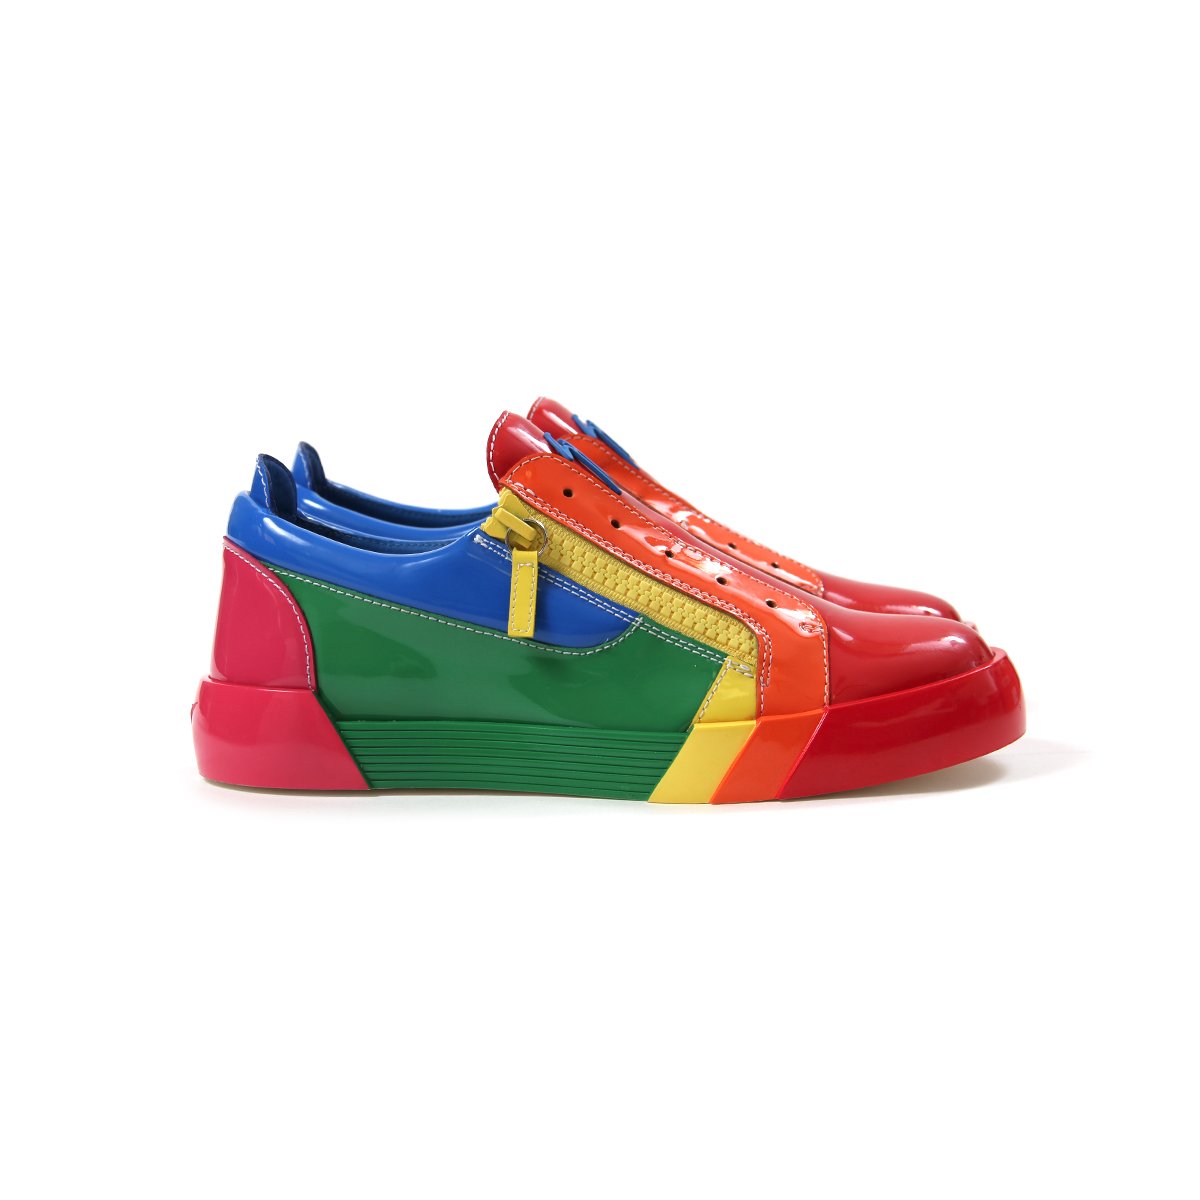 New RNBW Sneakers By Giuseppe Zanotti 